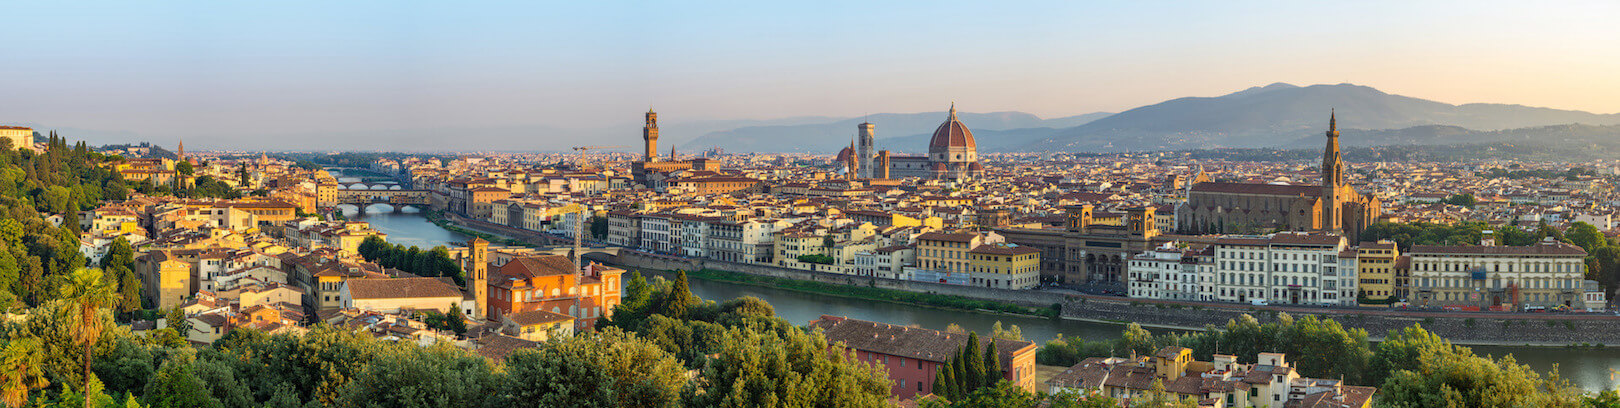 Florence in Italy - Wedding location